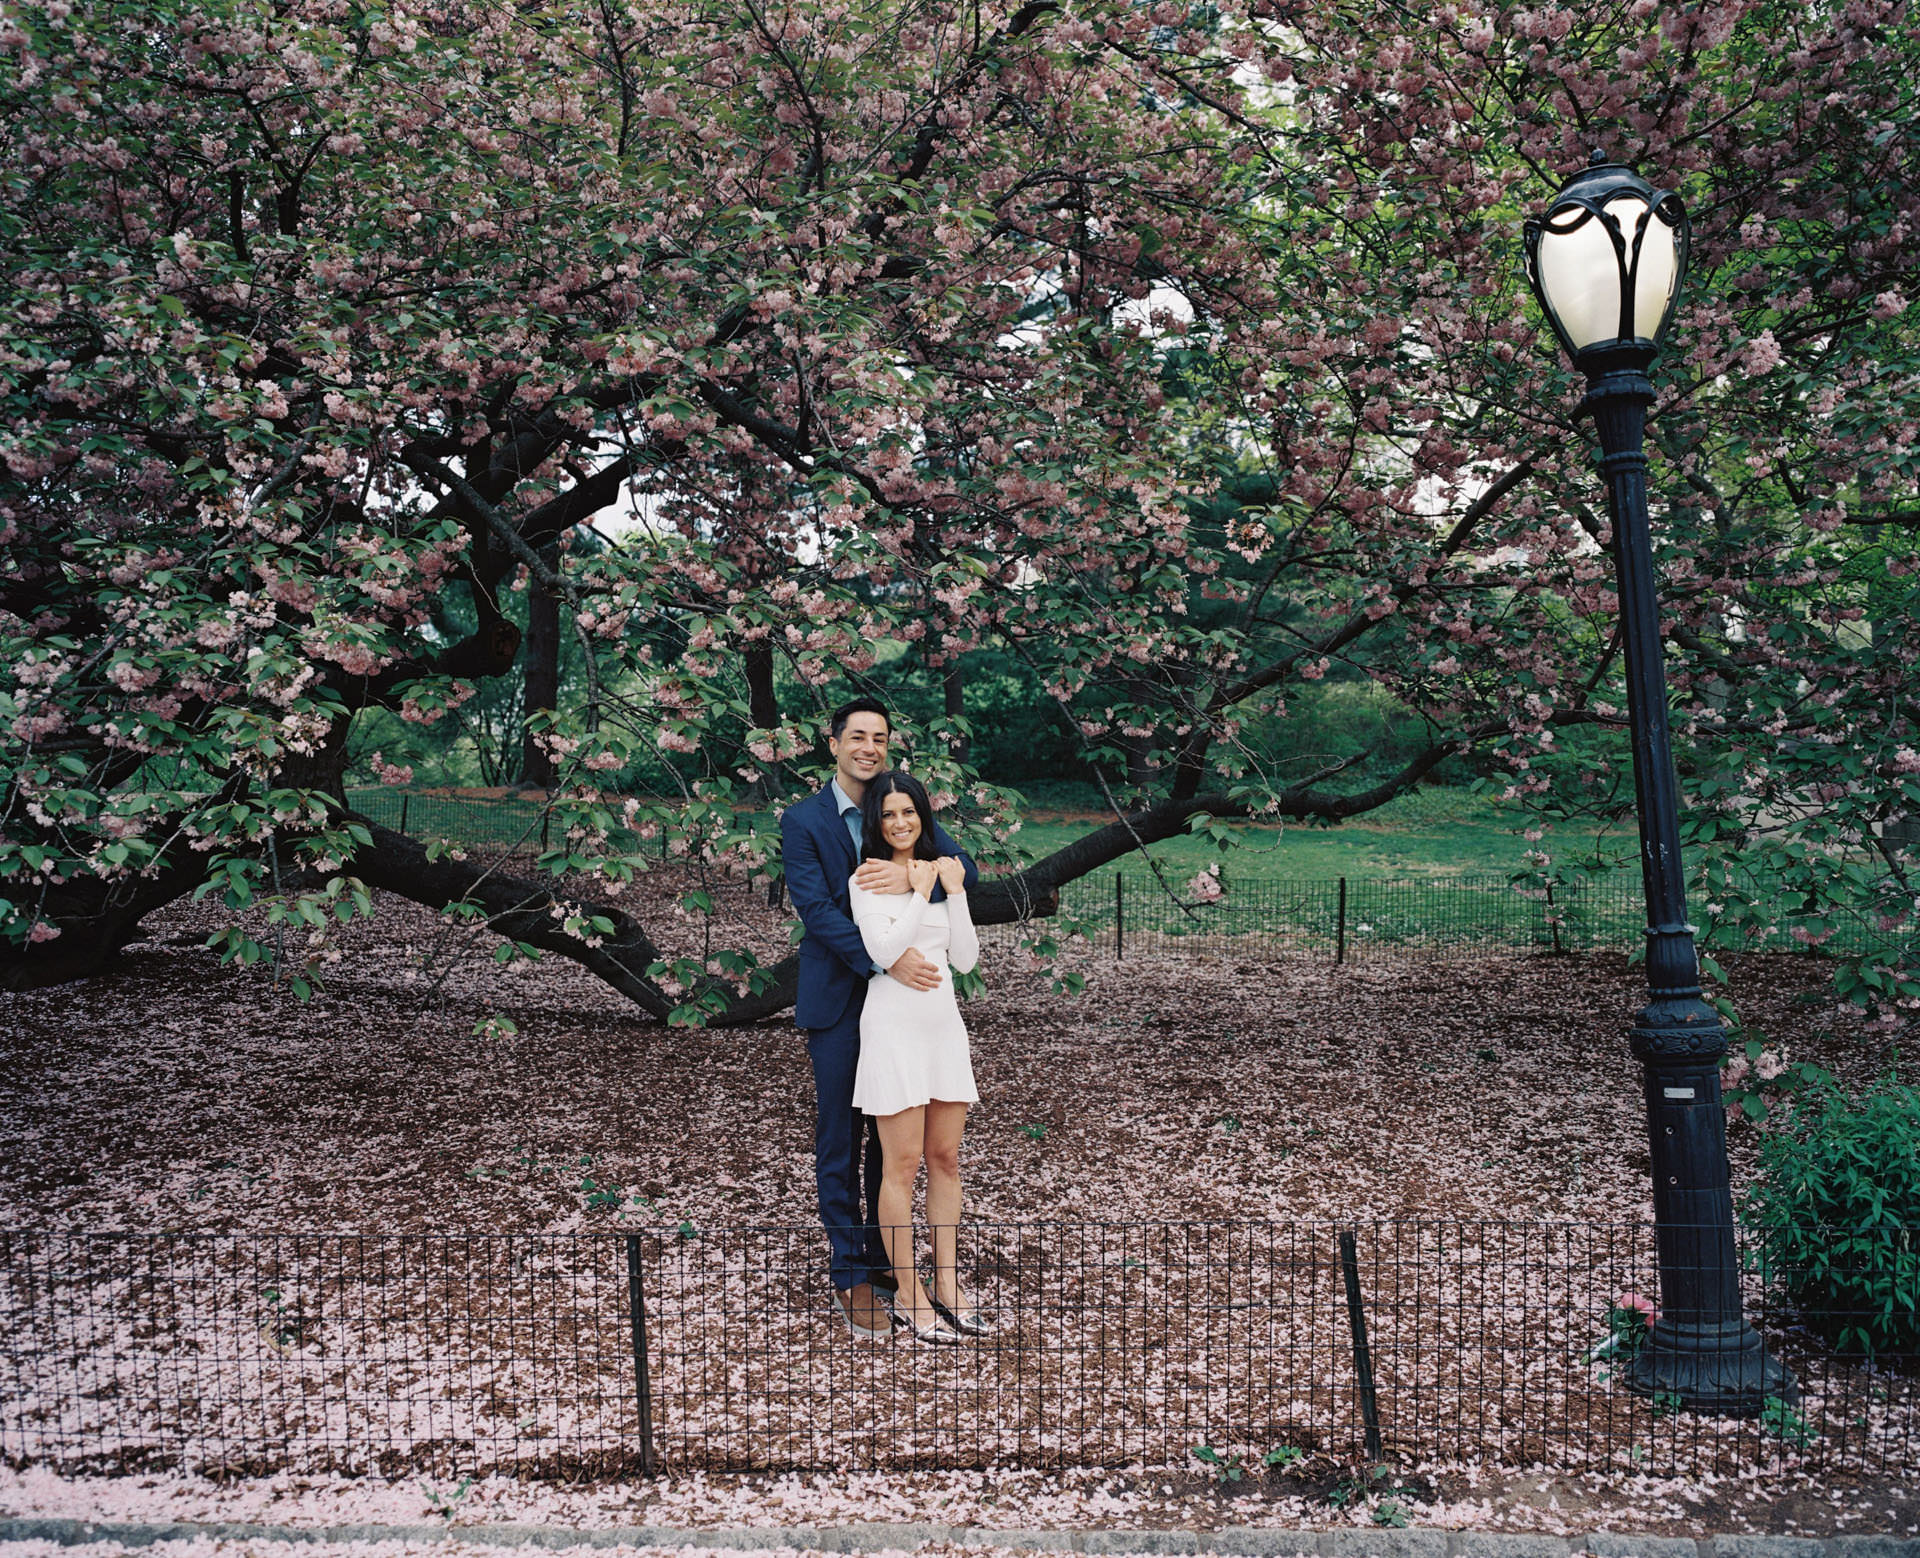 A couple standing under a canopy of blooming cherry blossoms at Cherry Hill, with petals gently falling around them.